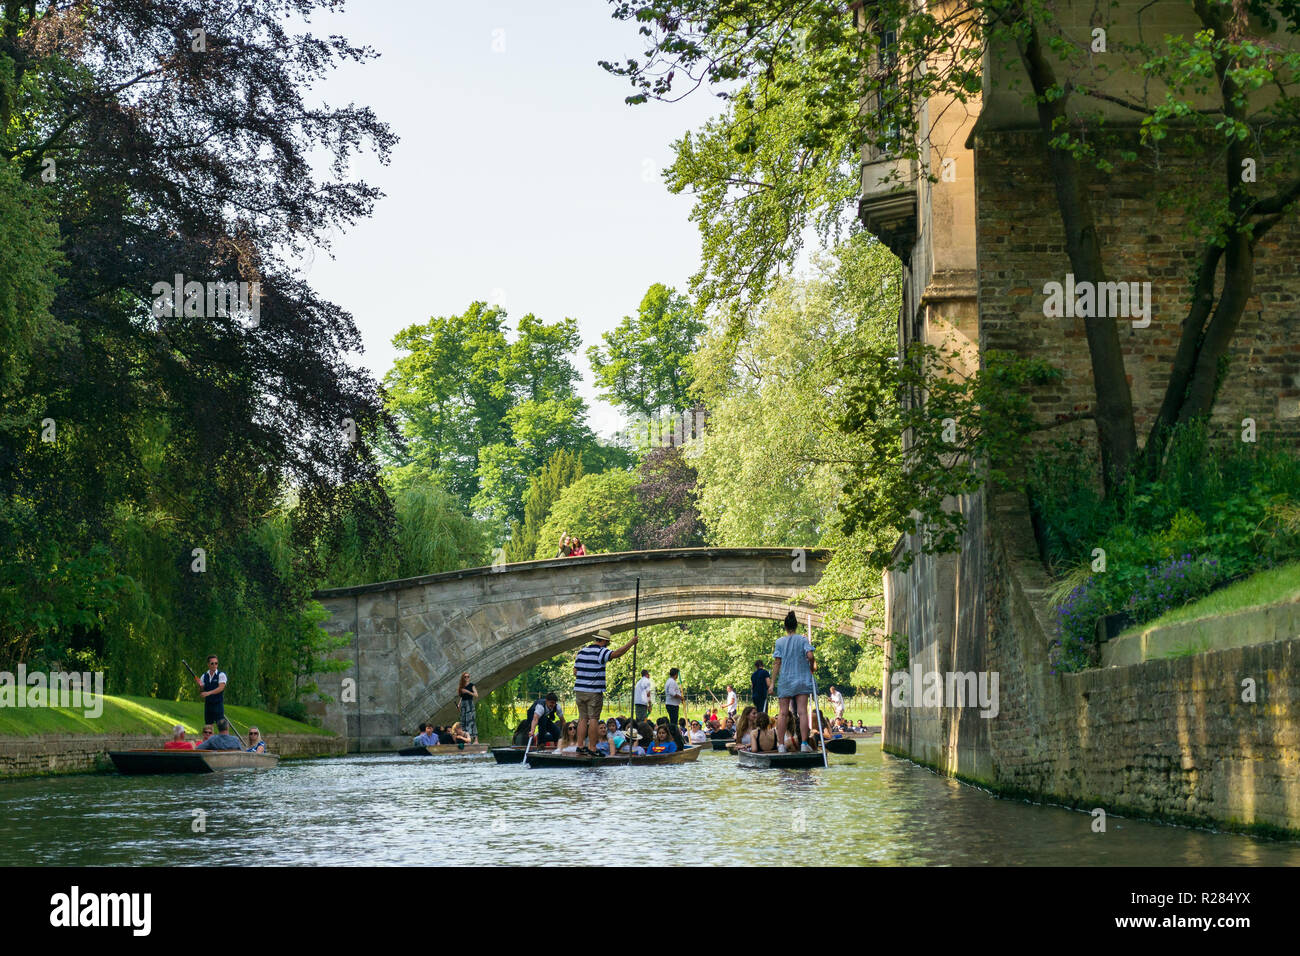 Several punt boats on a busy stretch of the river Cam near King's College Bridge, Cambridge, UK Stock Photo